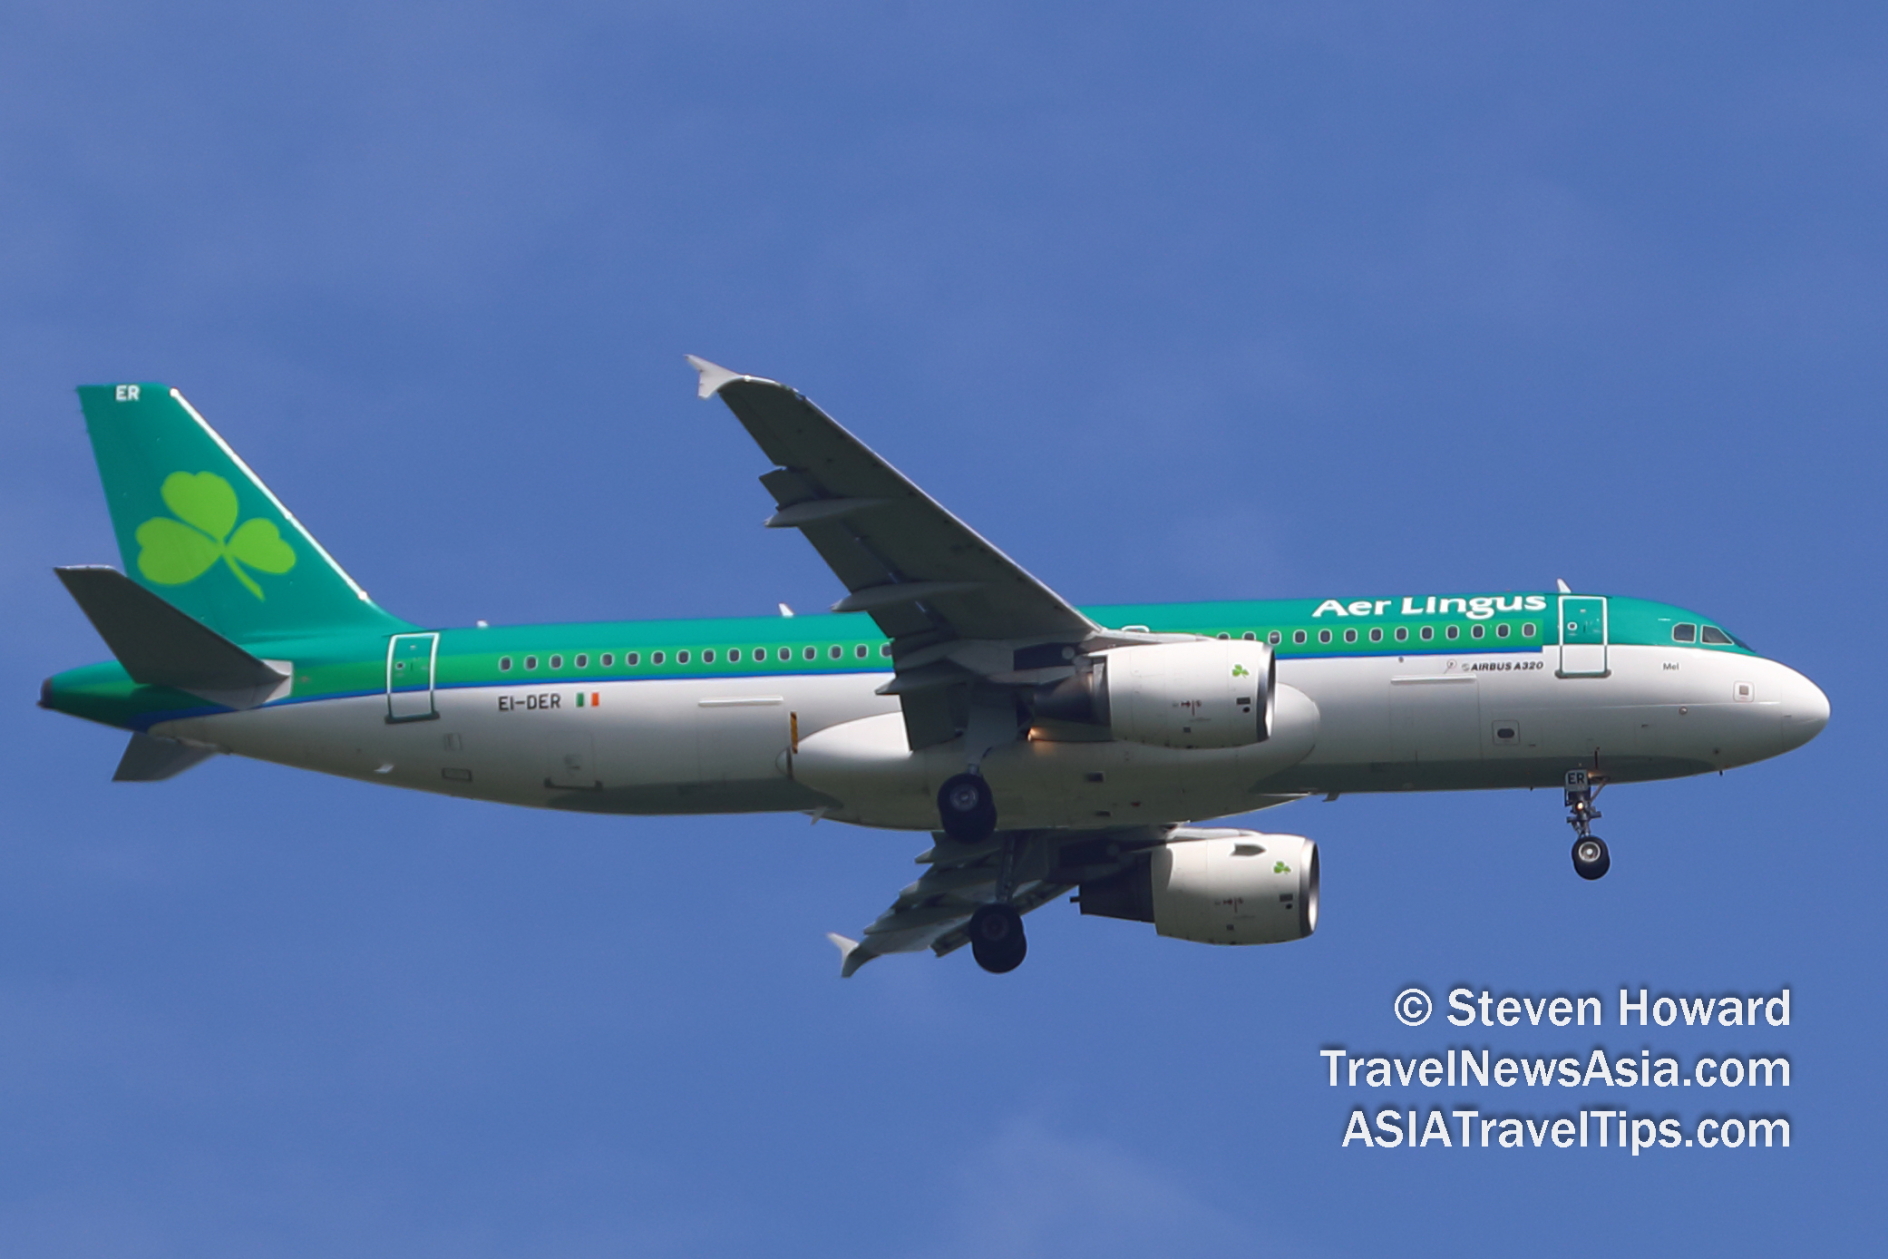 Aer Lingus A320 reg: EI-DER. Picture by Steven Howard of TravelNewsAsia.com Click to enlarge.